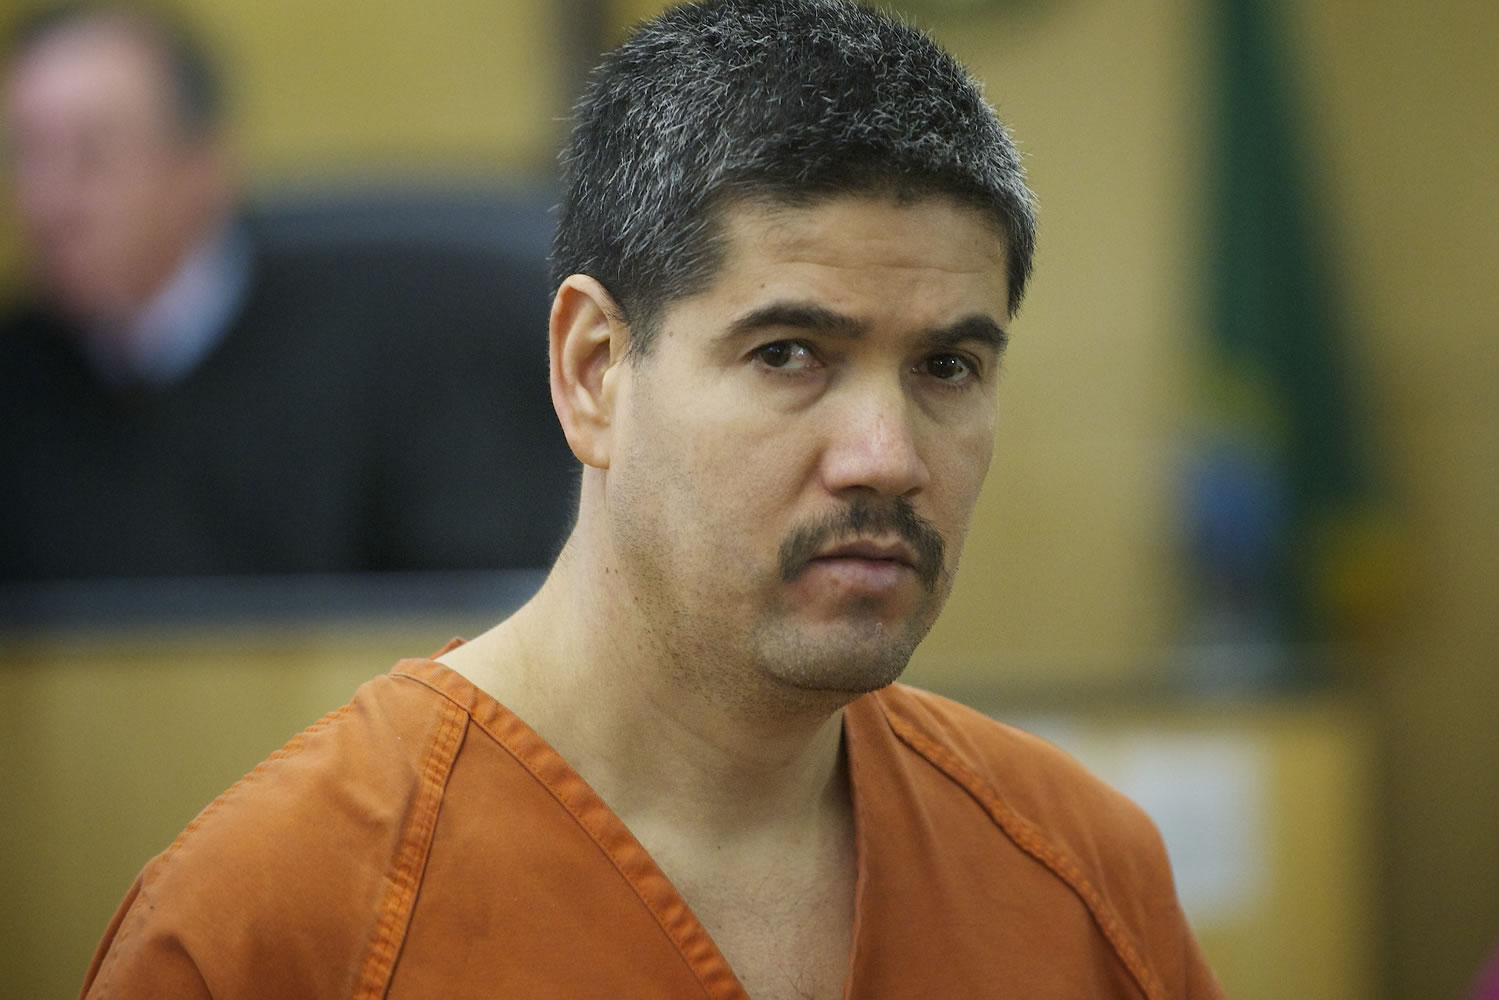 Gabriel Lomeli Orozco, 41, was arraigned Friday on a charge of attempted murder of his wife. The charges were delayed until he could be treated for hallucinations and severe depression.